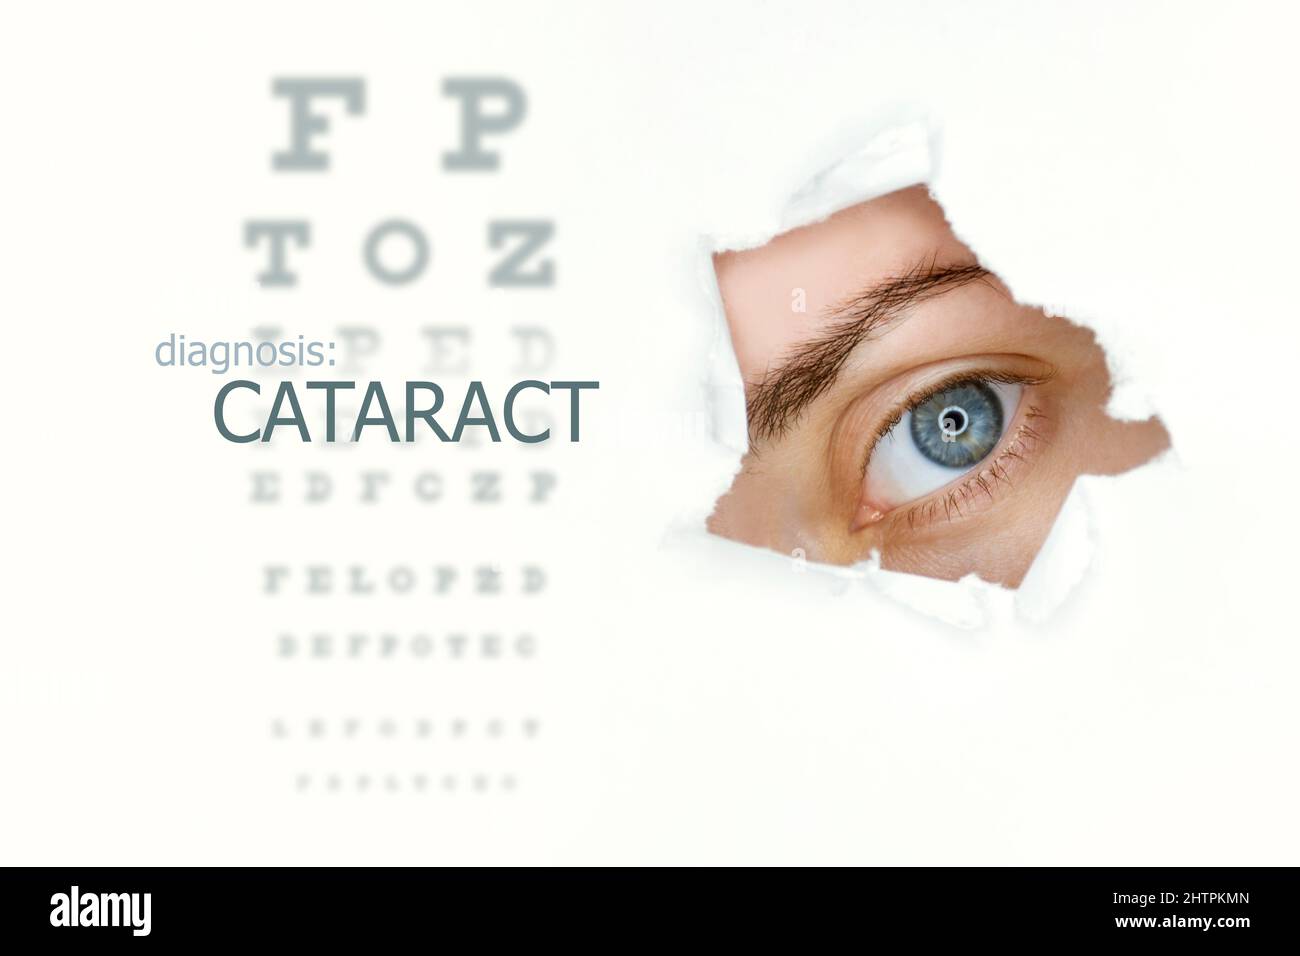 Cataract disease poster with eye test chart and  blue eye on right.Isolated on white Stock Photo